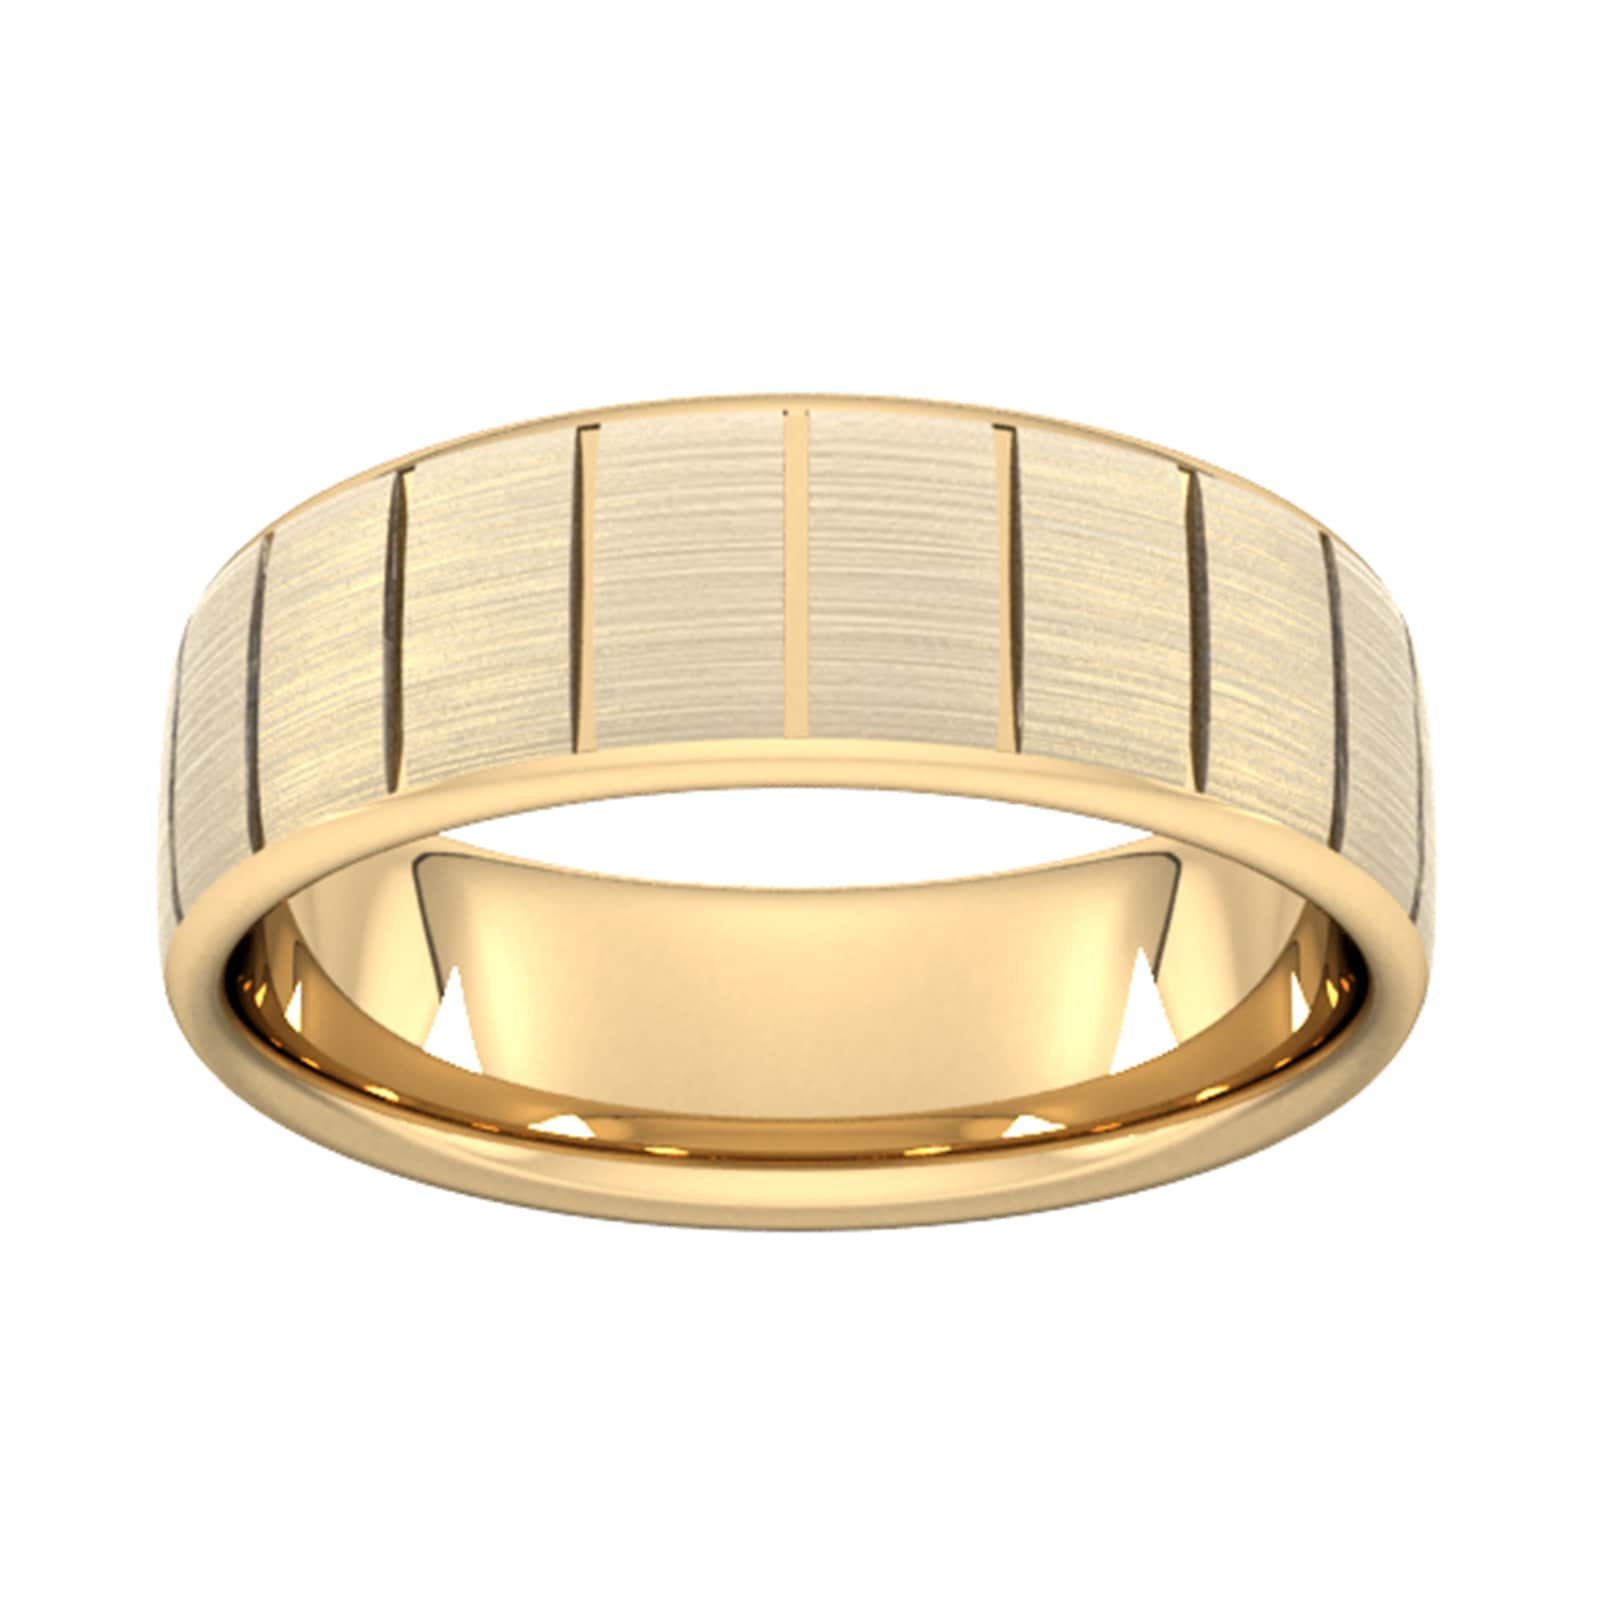 7mm Traditional Court Heavy Vertical Lines Wedding Ring In 9 Carat Yellow Gold - Ring Size L